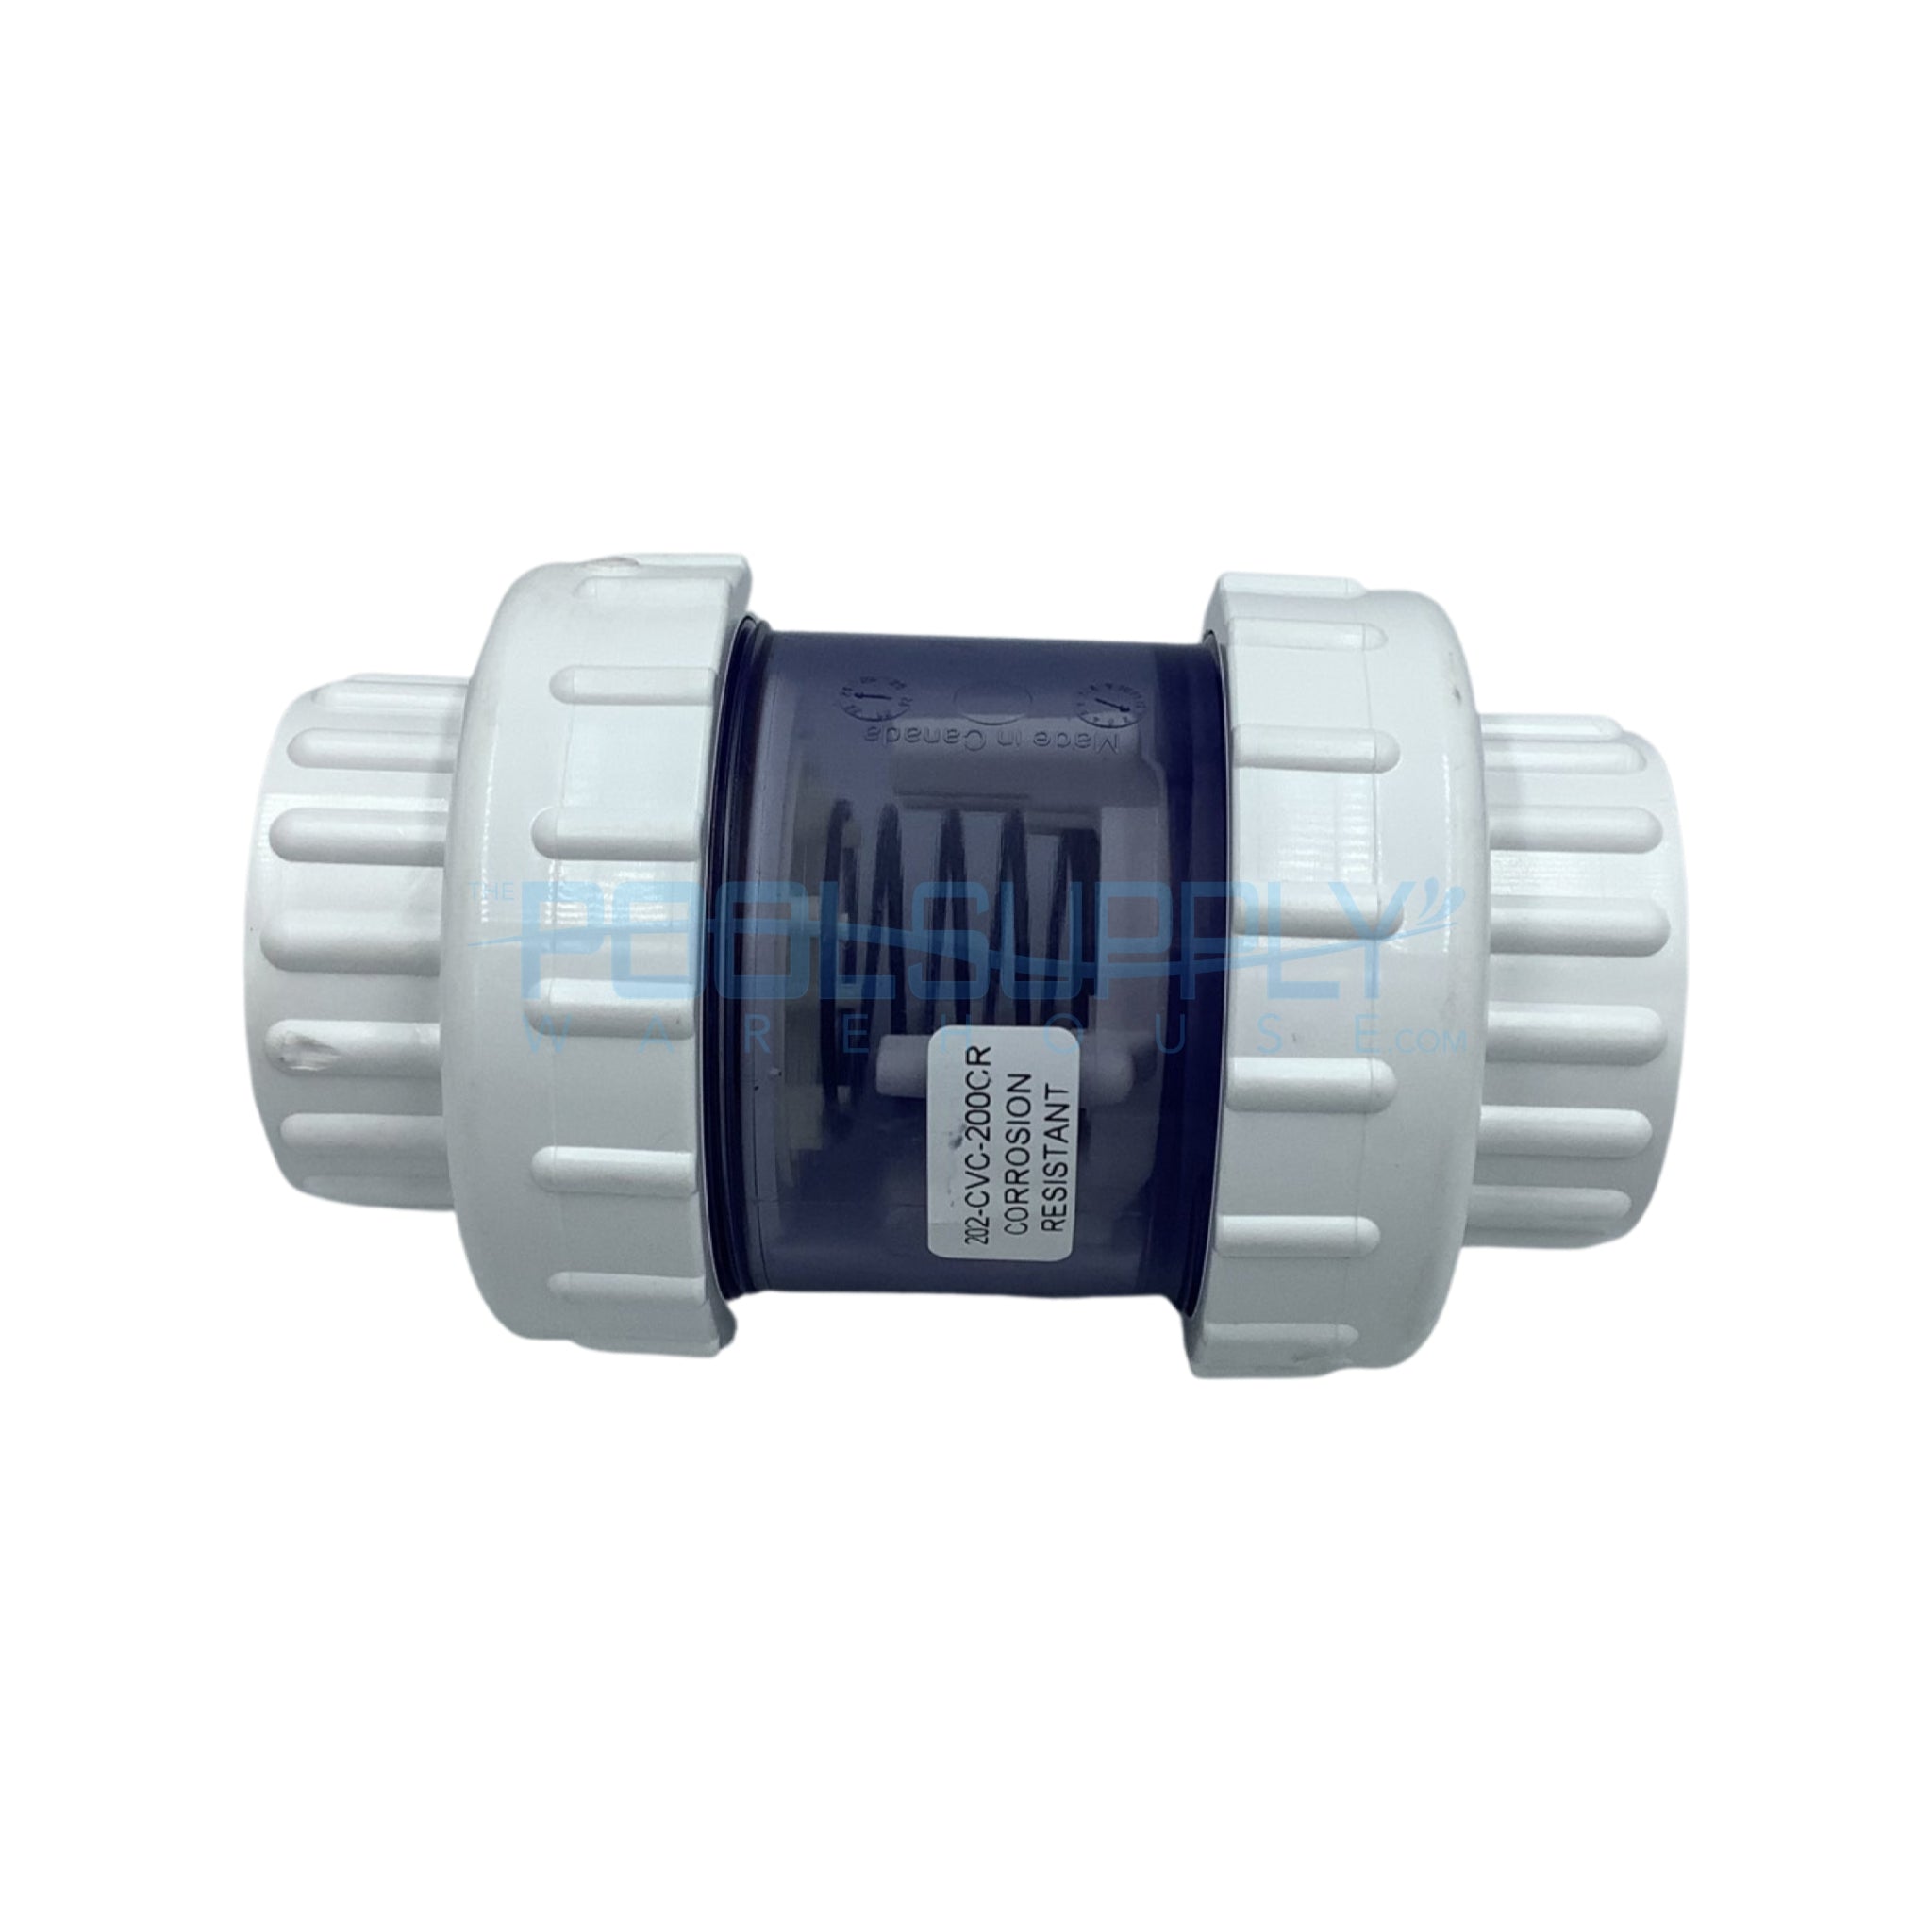 Praher 2" Double Union Clear Spring Check Valve, Clear - 202-CVC-200CR - The Pool Supply Warehouse